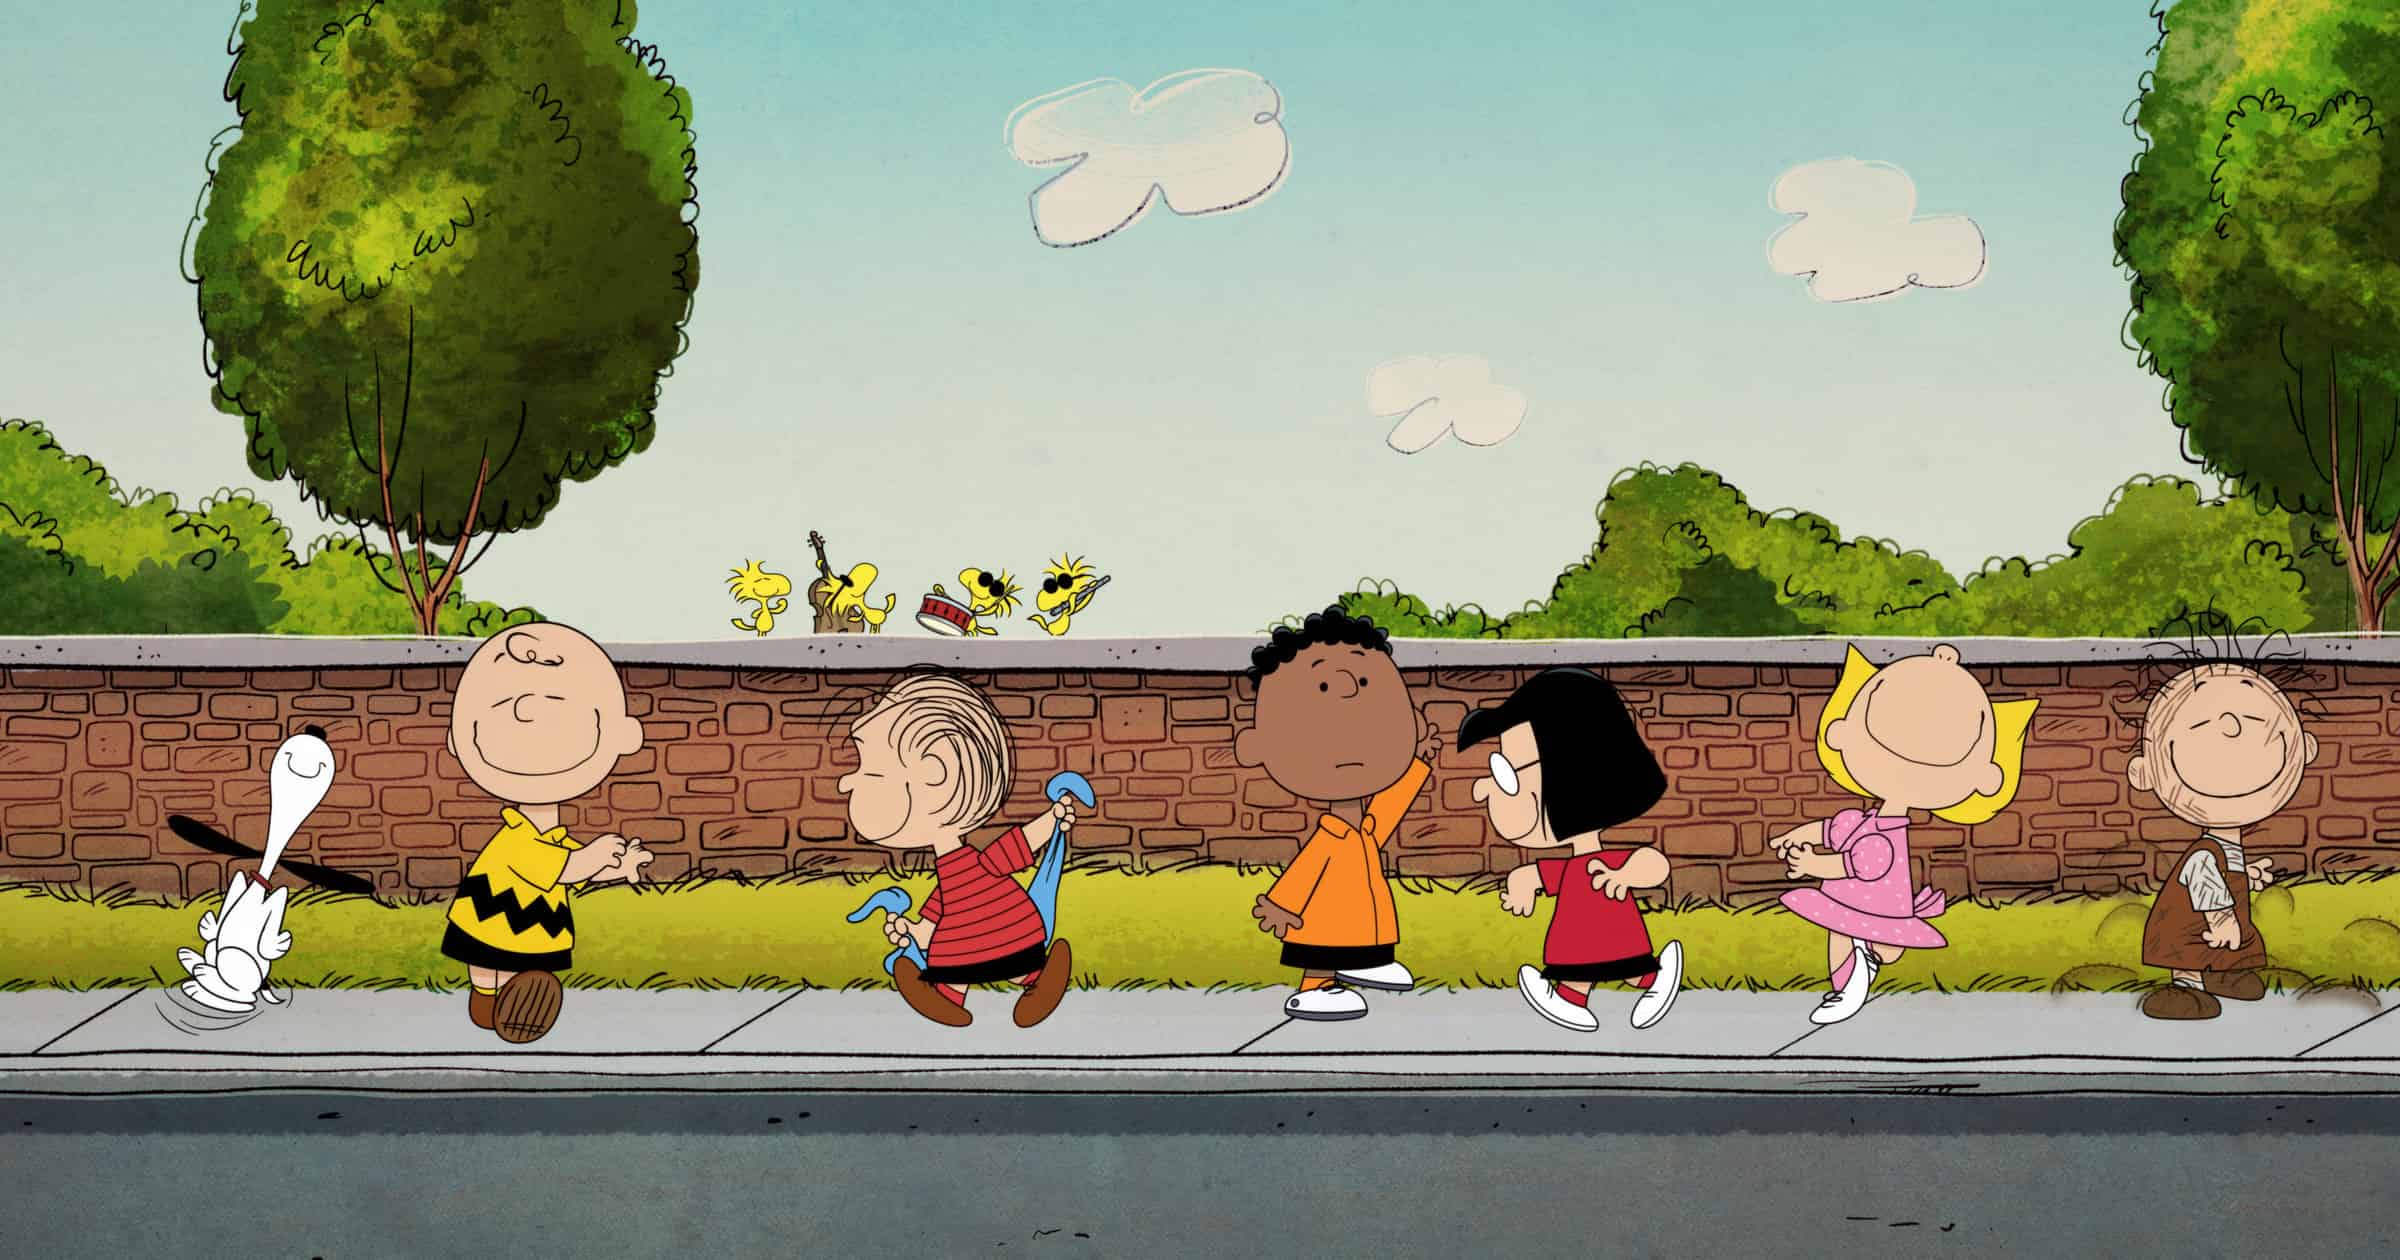 Some Peanuts Fans Are Not Happy The Holiday Specials Are Only Going to be on Apple TV+